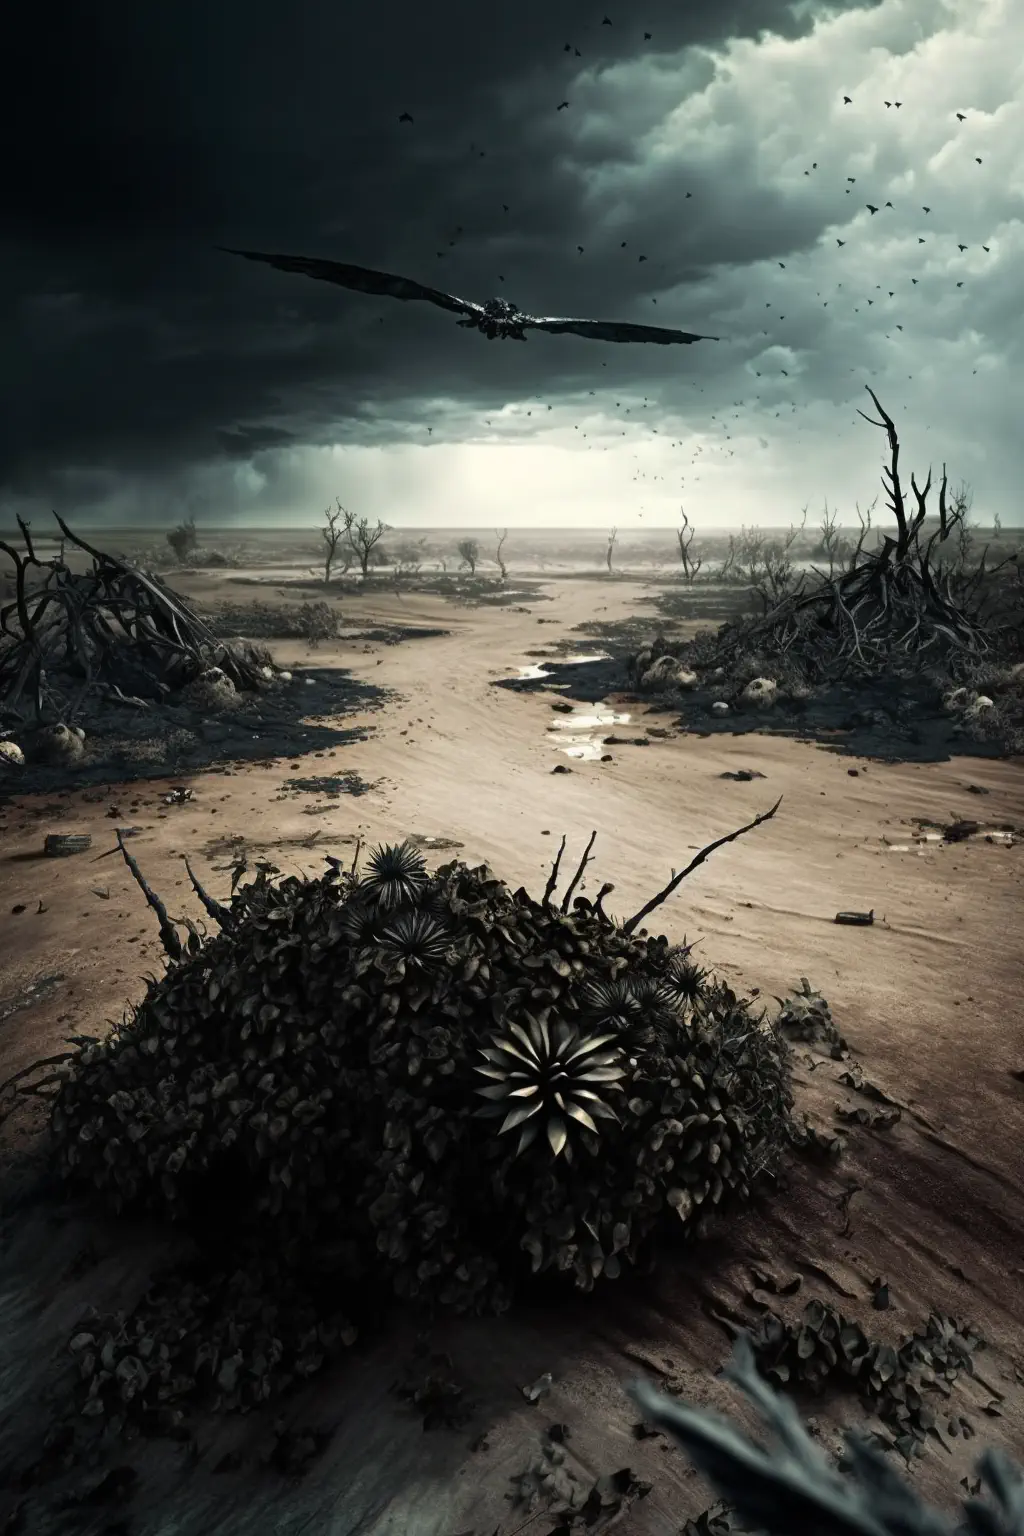 Drak0nchik23_panorama_wide_view_of_post-apocalyptic_plains_blac_7d40d845-85b0-4381-9117-929452f41122